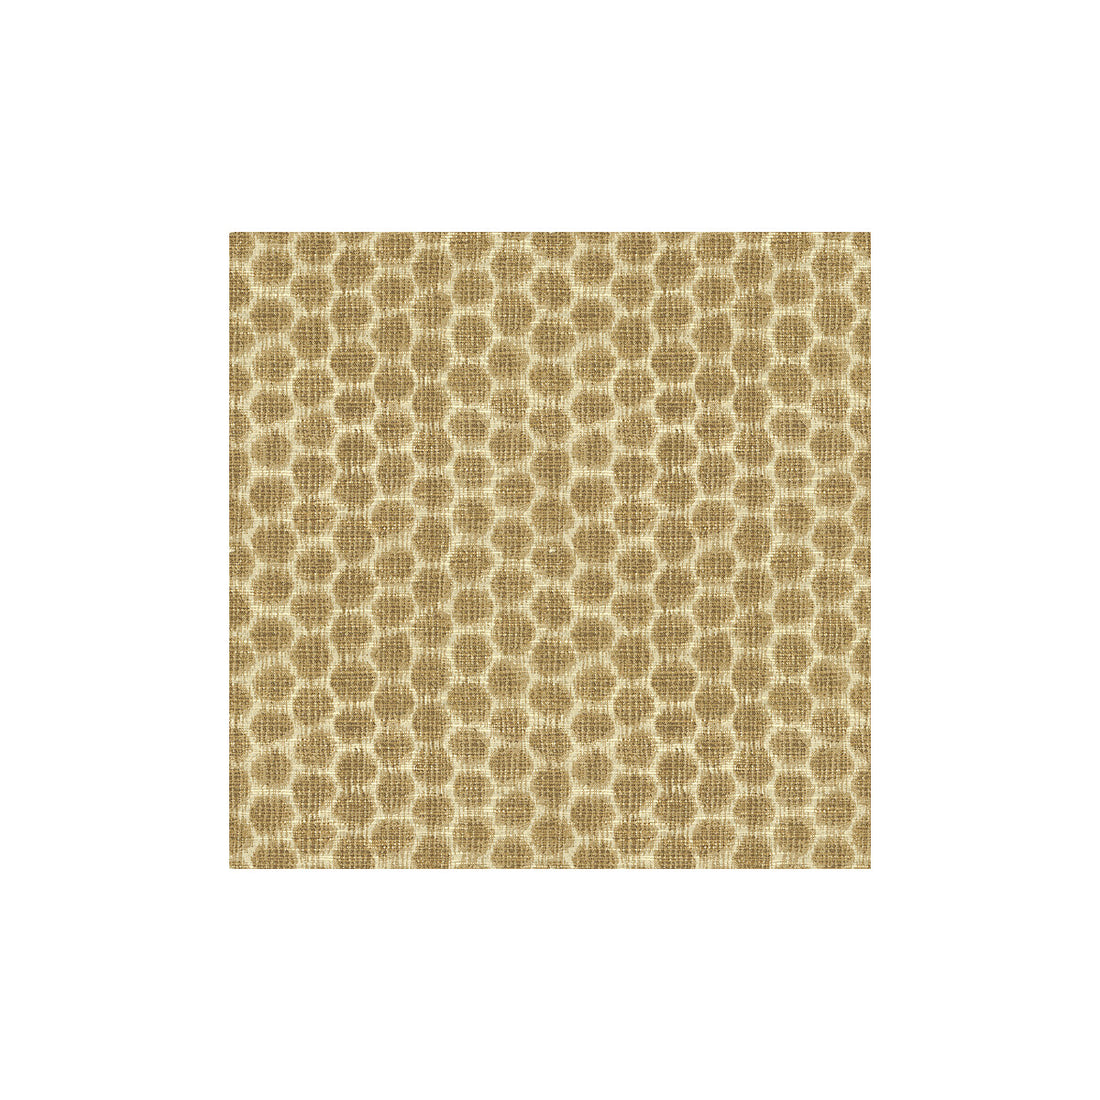 Kravet Smart fabric in 33134-106 color - pattern 33134.106.0 - by Kravet Smart in the Echo collection